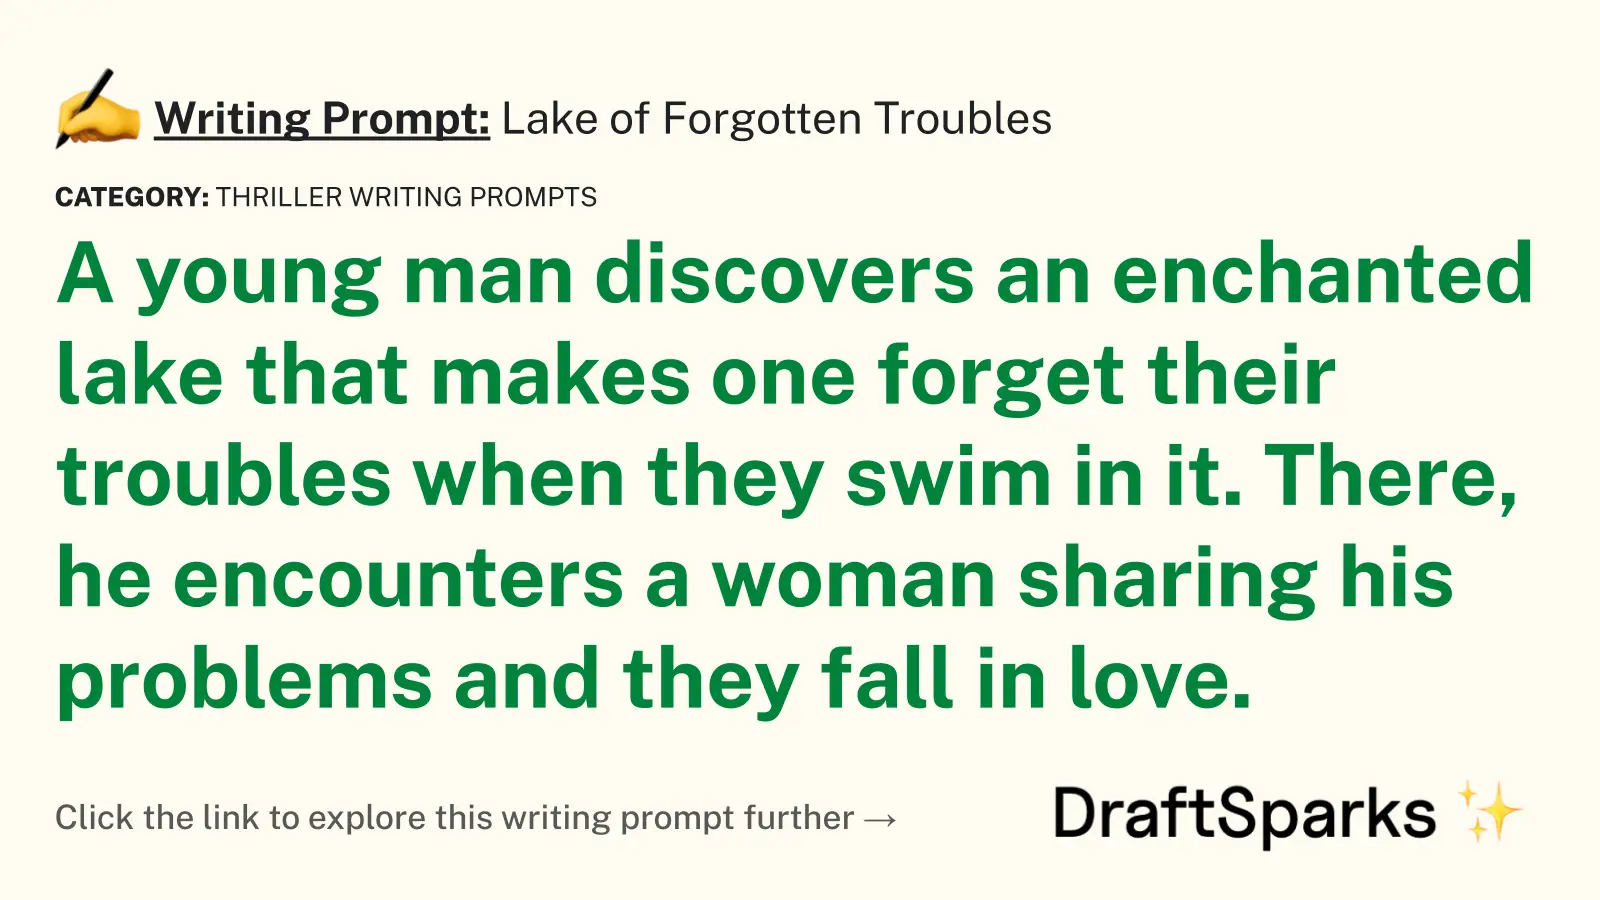 Lake of Forgotten Troubles